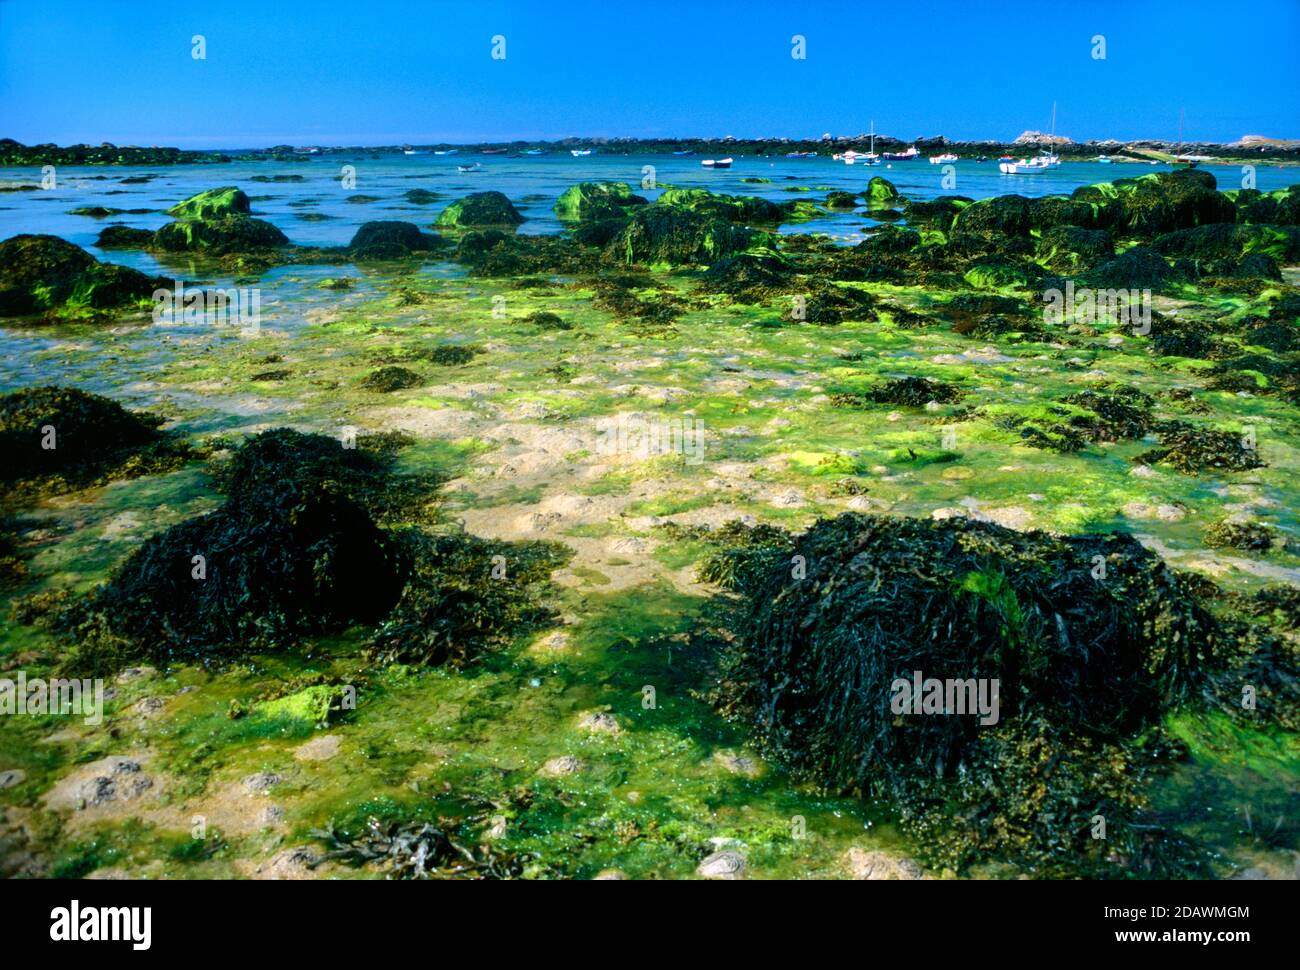 Bladder Wrack, Fucus vesiculosus, & Green Laver Exposed at Low Tide on Seashore or Shore at Portsall Ploudalmézeau Finistère Brittany France Stock Photo